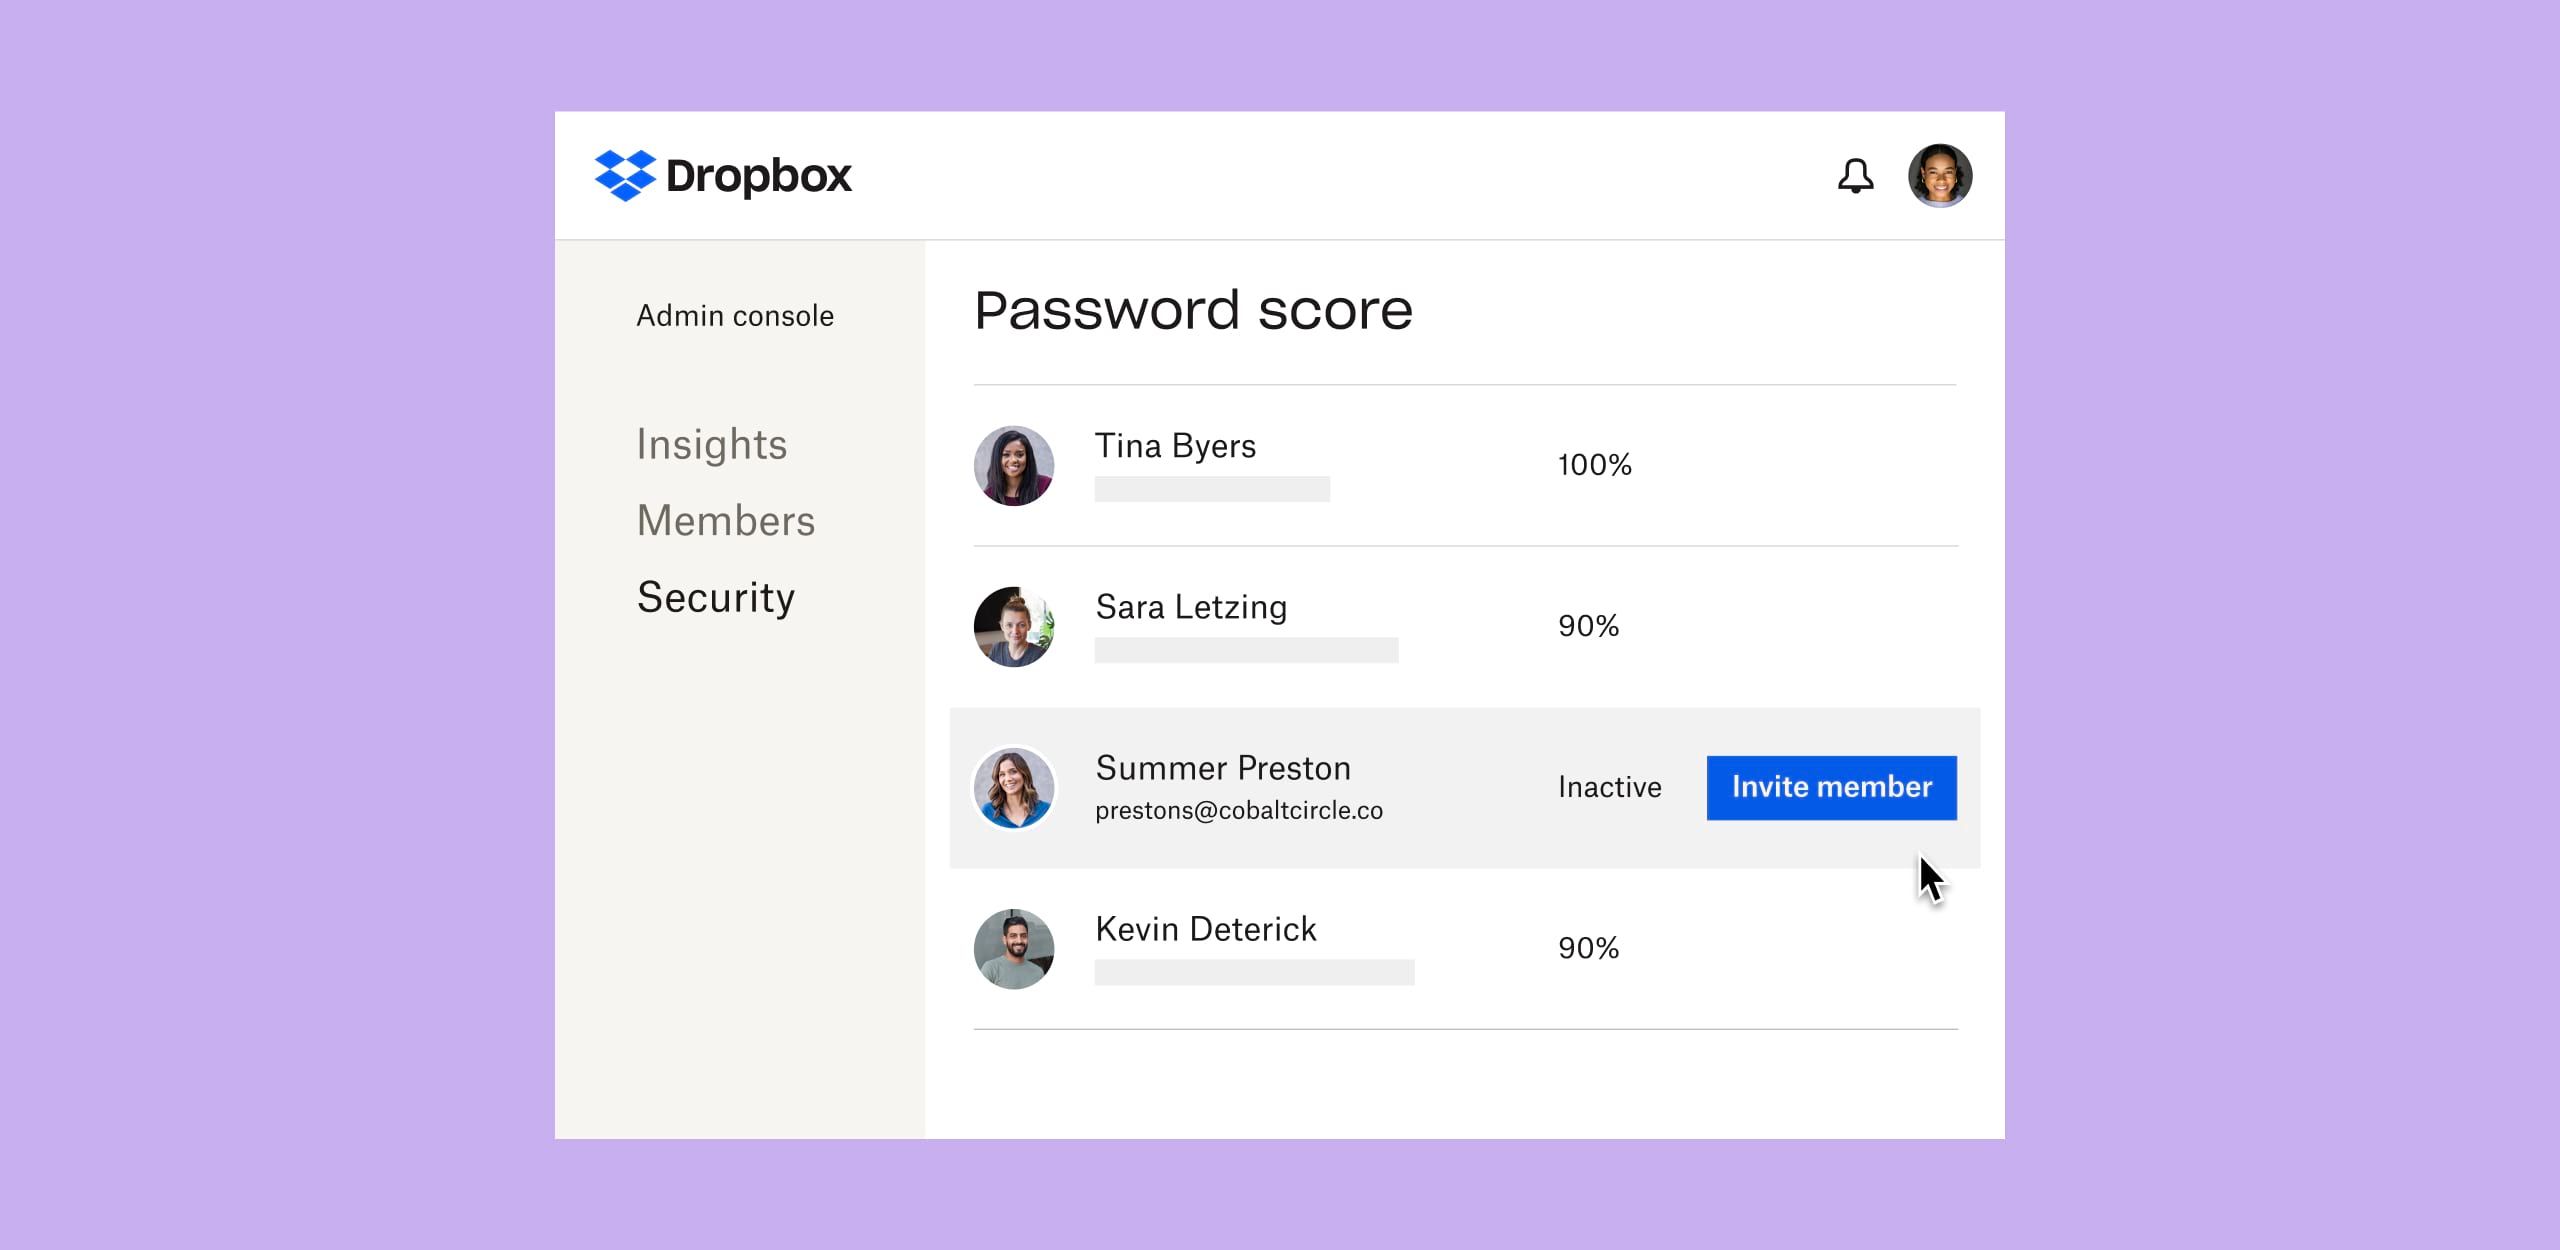 A Dropbox interface showing individual users’ password scores and a blue button labelled ‘invite member’ next to an inactive user profile